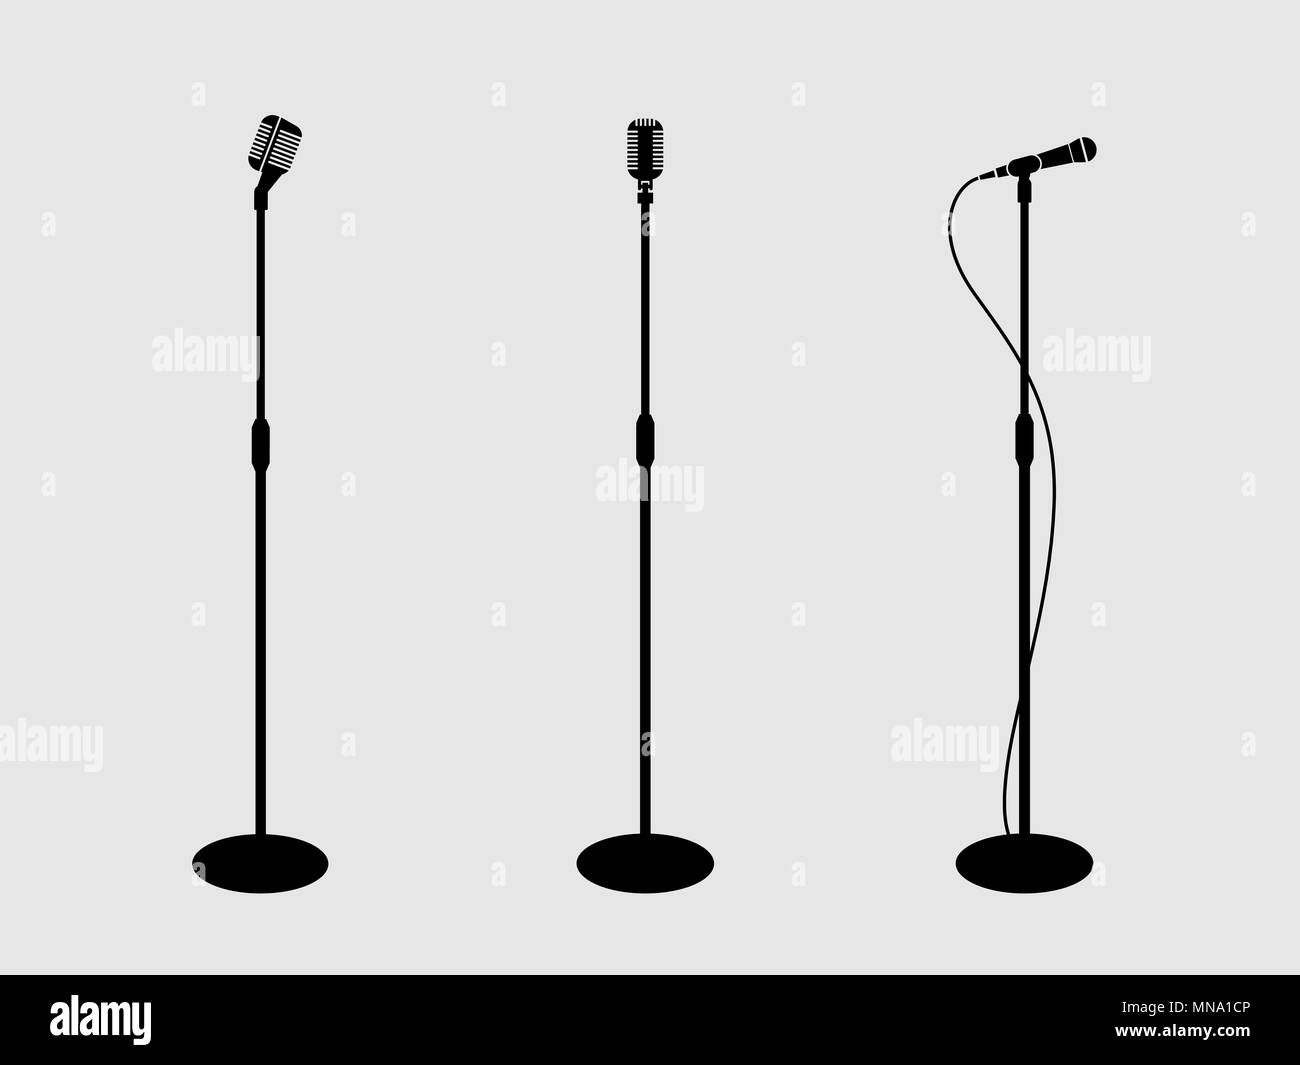 Three microphones on counter. light background. silhouette microphone. Music icon, mic. Flat design, vector. Stock Vector